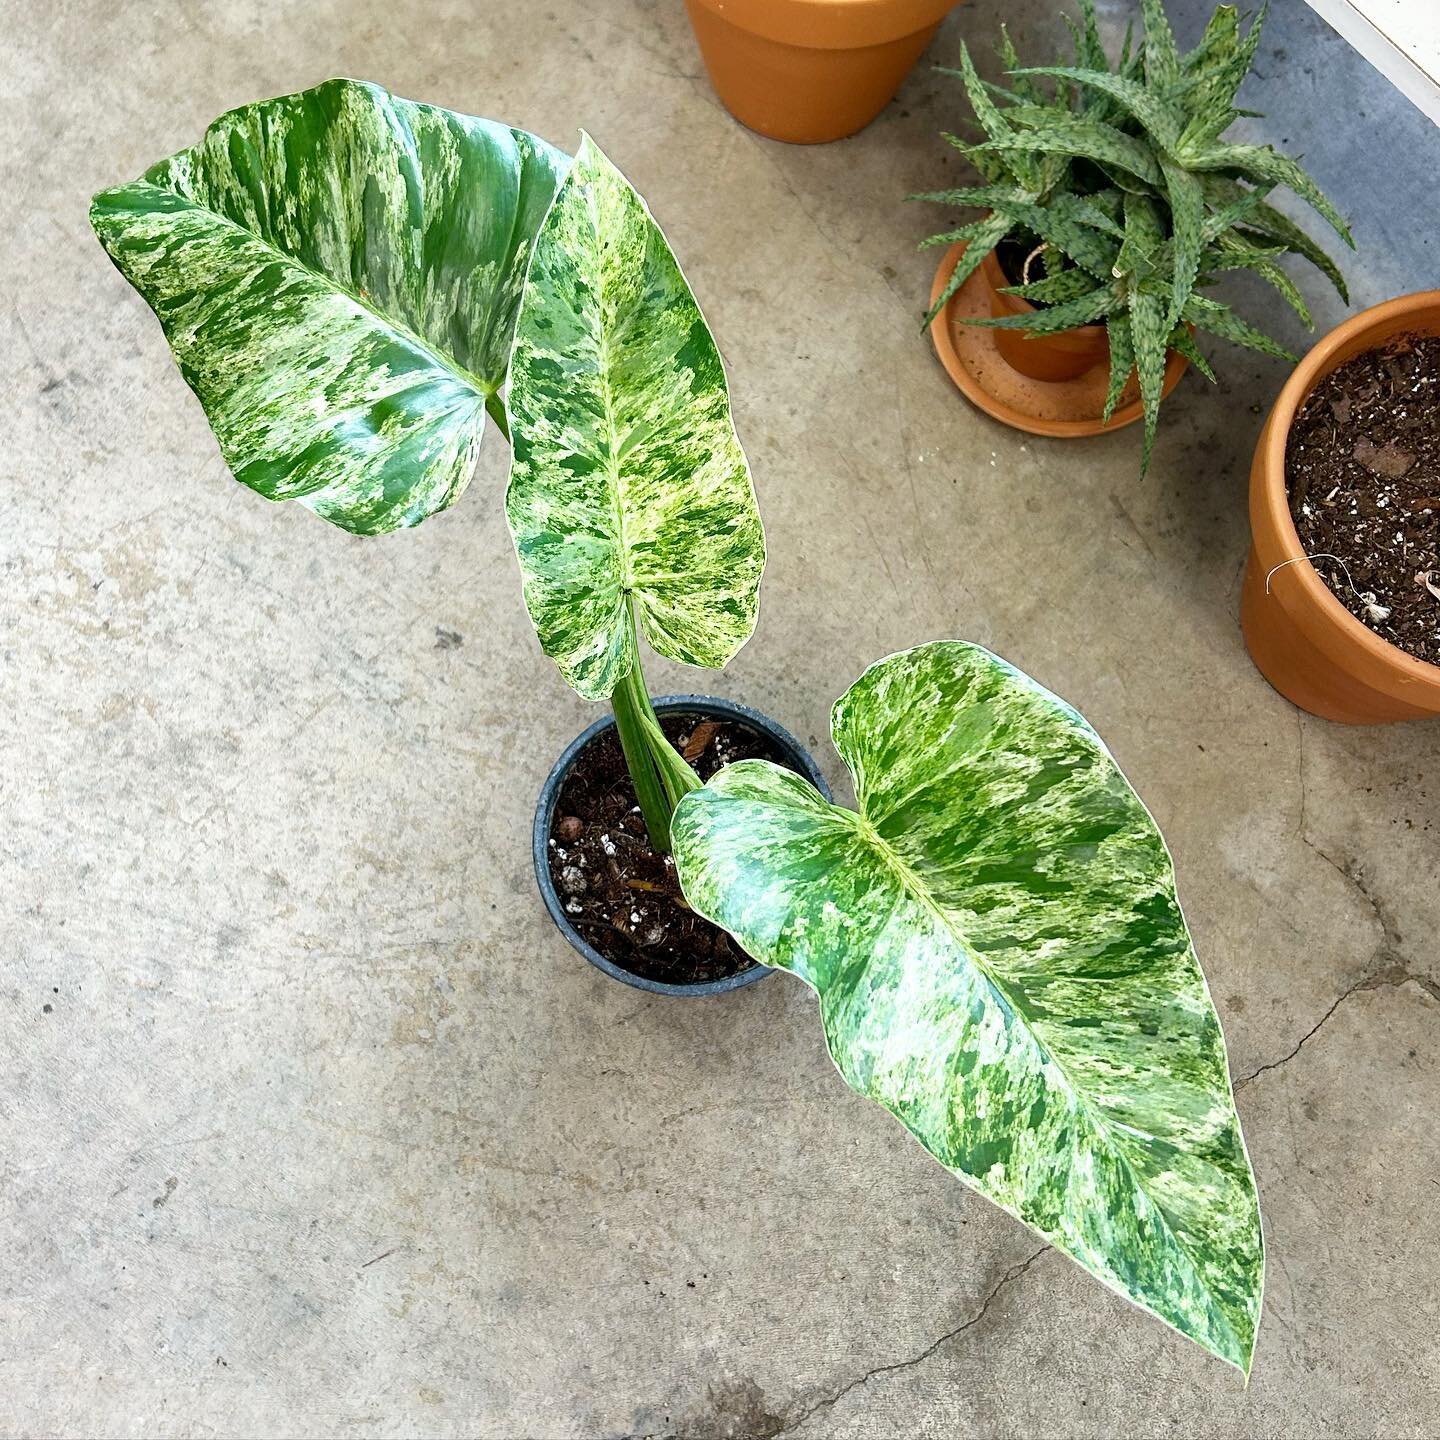 Today&rsquo;s forecast: Hot with 100% chance of blizzard! 😎 Hey! Shop&rsquo;s open 12-5:30!

Lotza new plants in as usual!

📸 - Philodendron &lsquo;Giganteum Blizzard&rsquo;

#catalinaplantco #philodendrongiganteumblizzard #philodendron #chicagopla